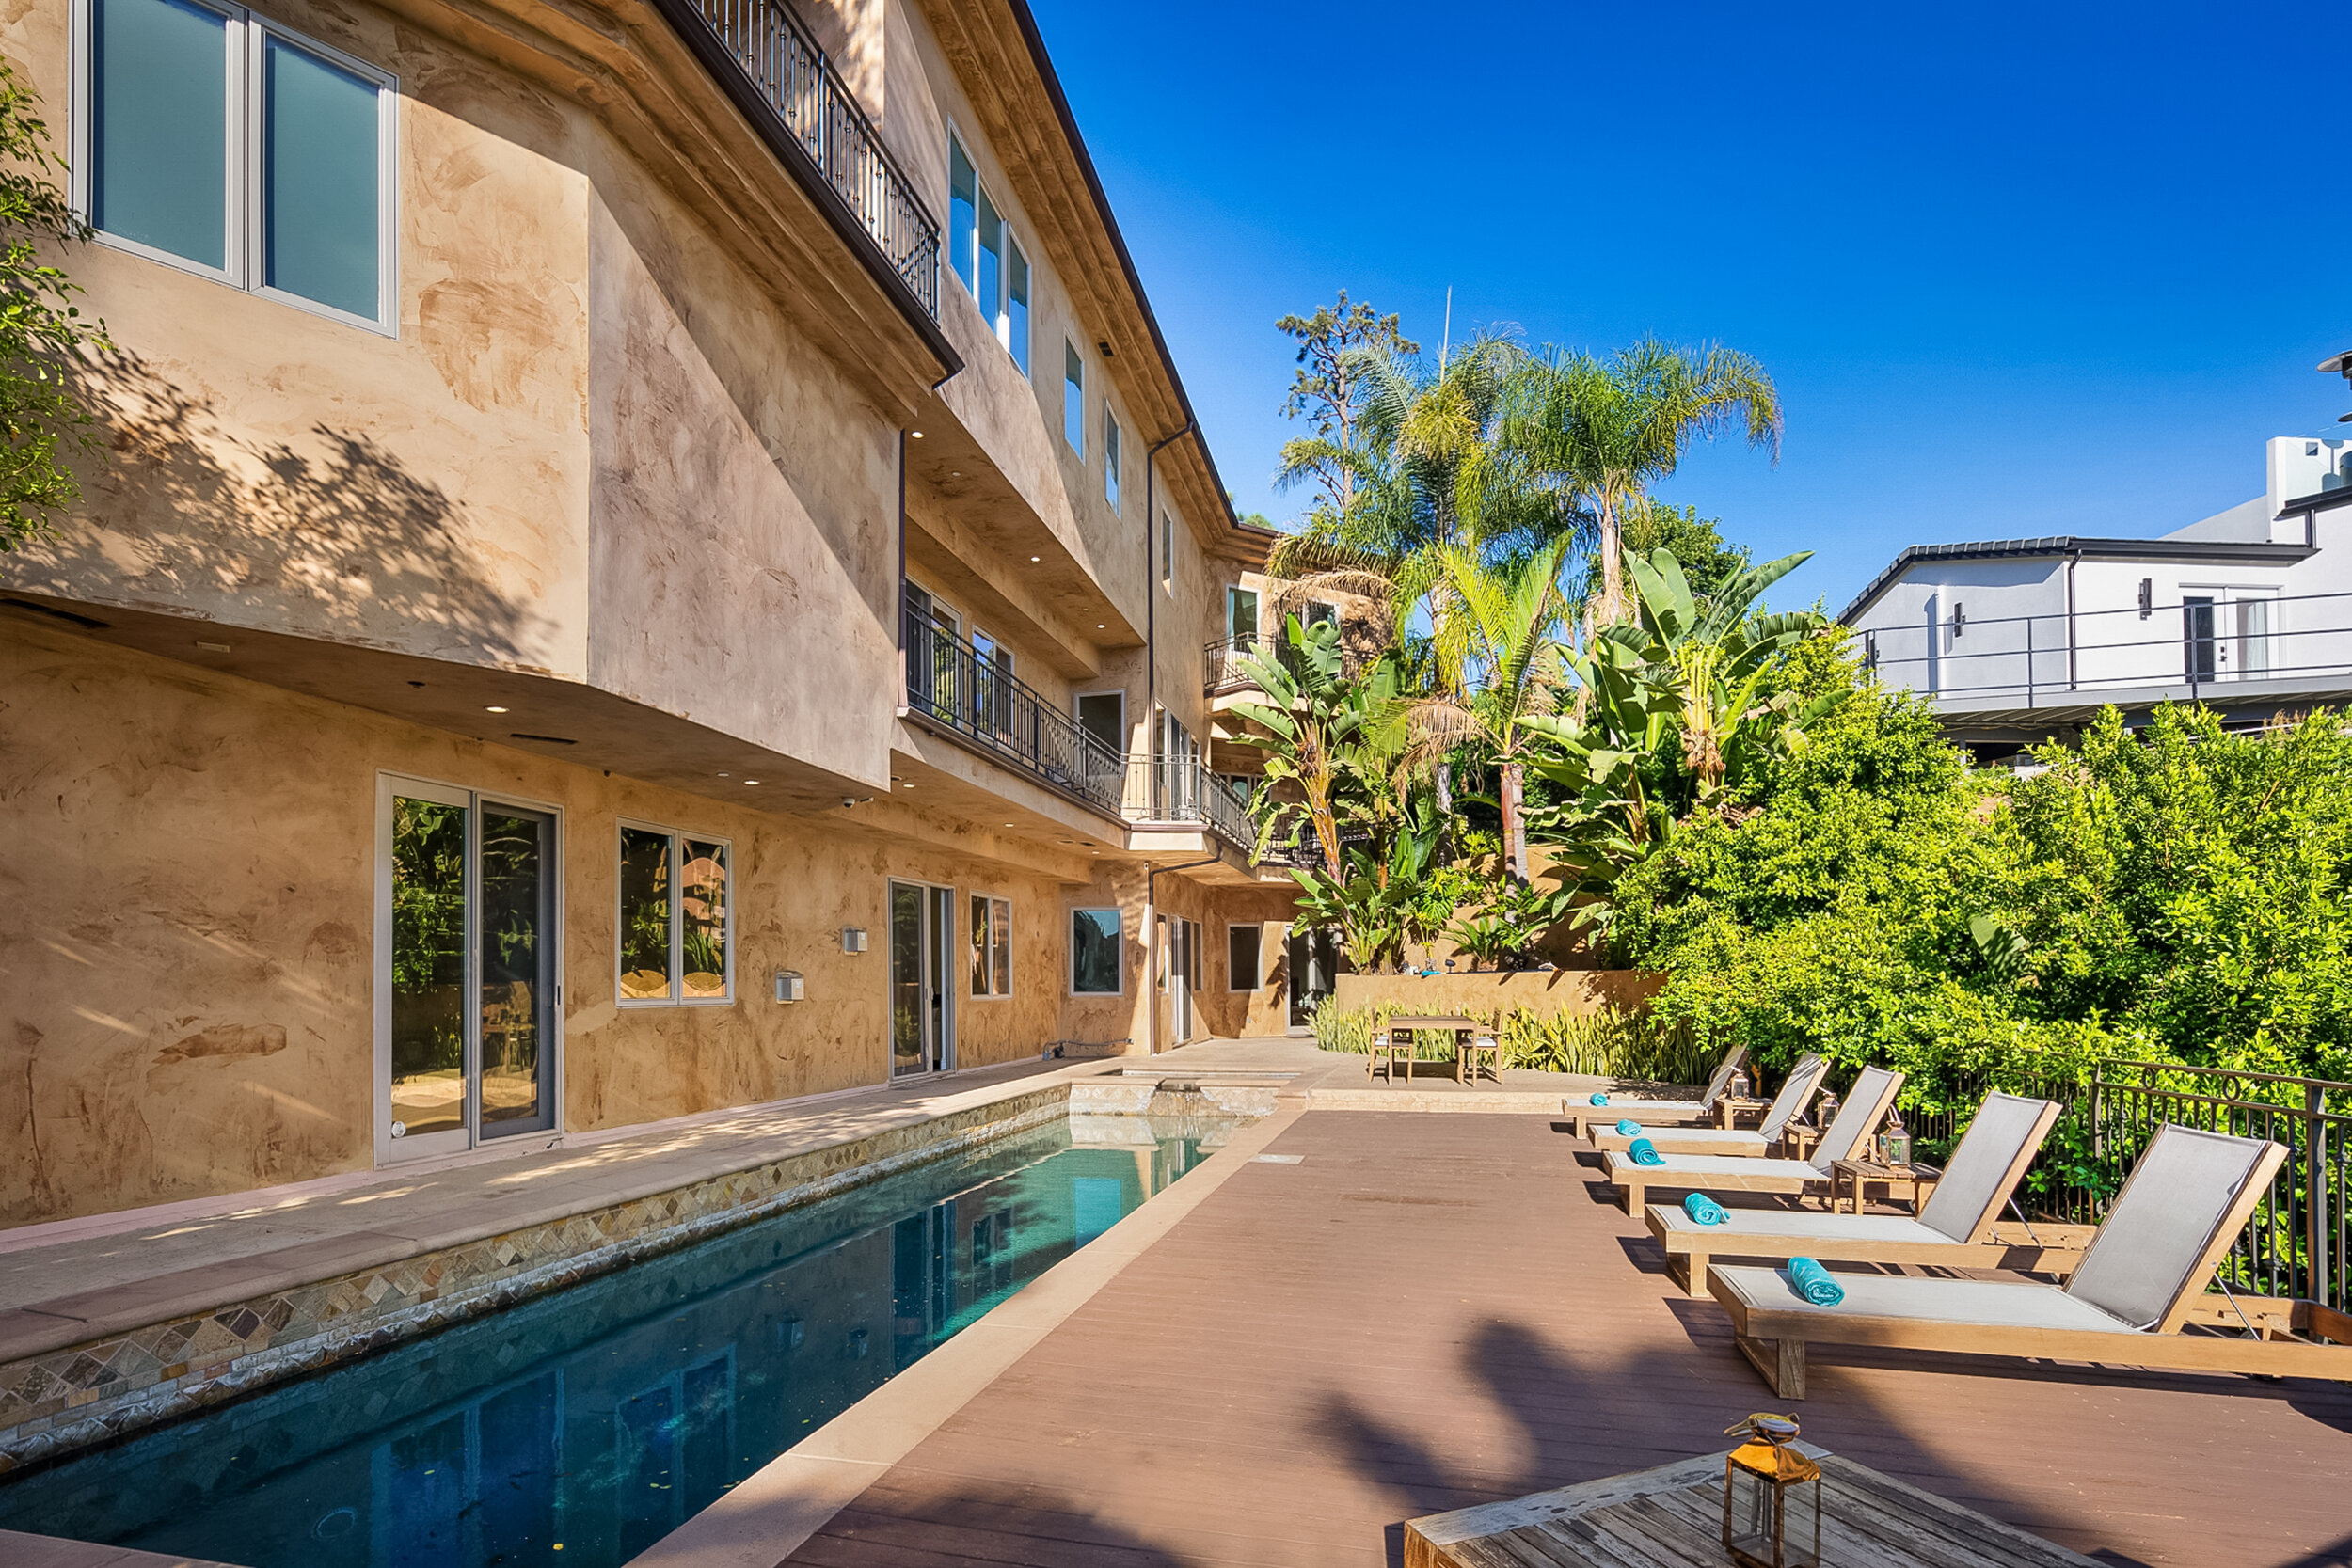 Deep Dell 2 - Hollywood Hills, 7BR, 8BA, 6597 Sq-ft, Spanish Style, Game Room, Theater, Rooftop Deck, Pool, Spa, View-72.jpg